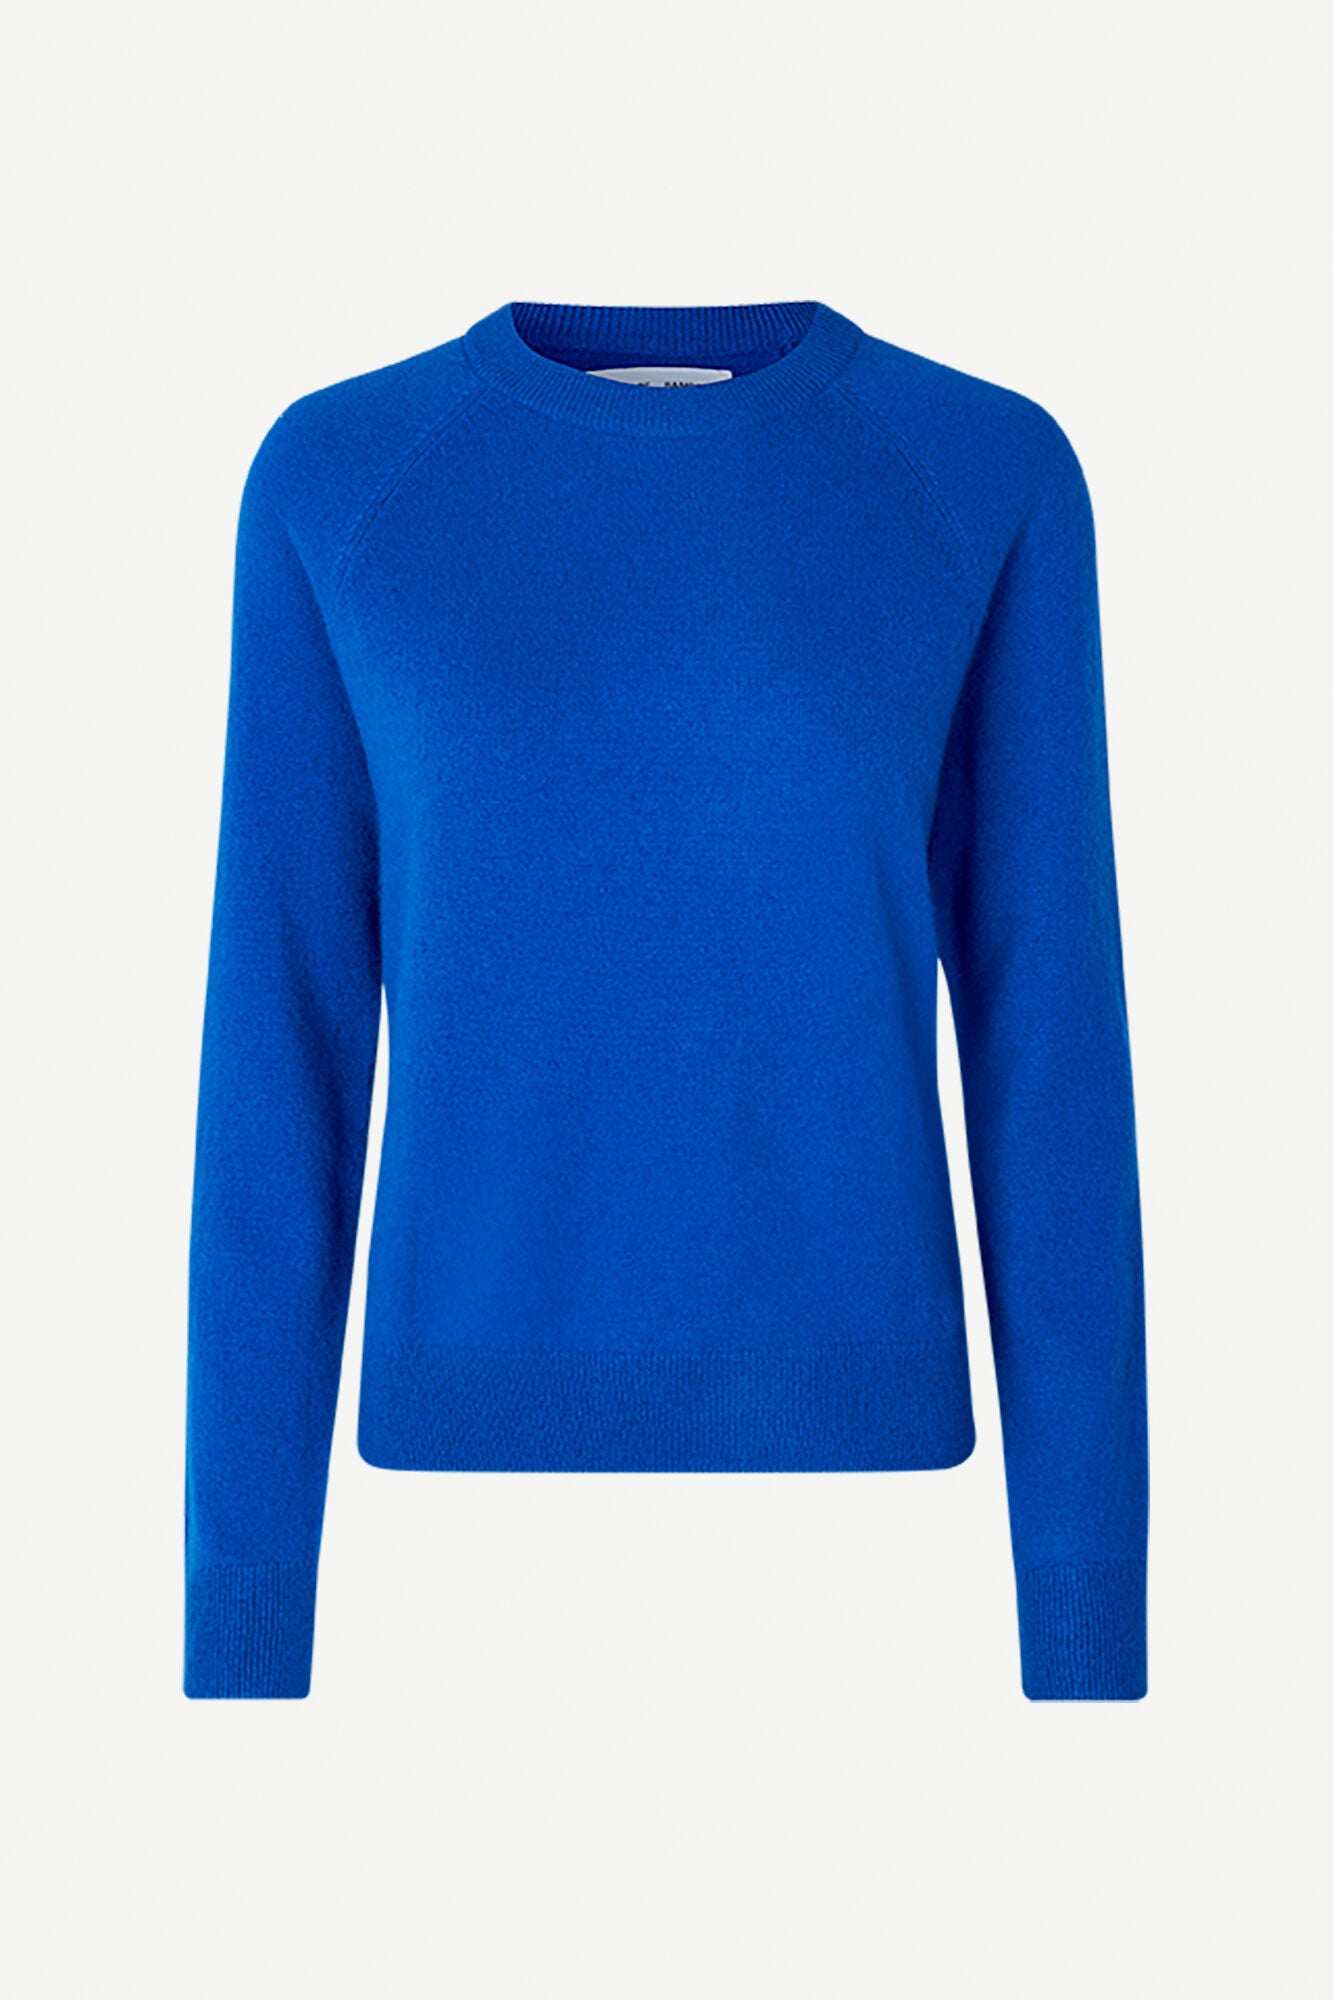 Pure cashmere crew neck in royal blue